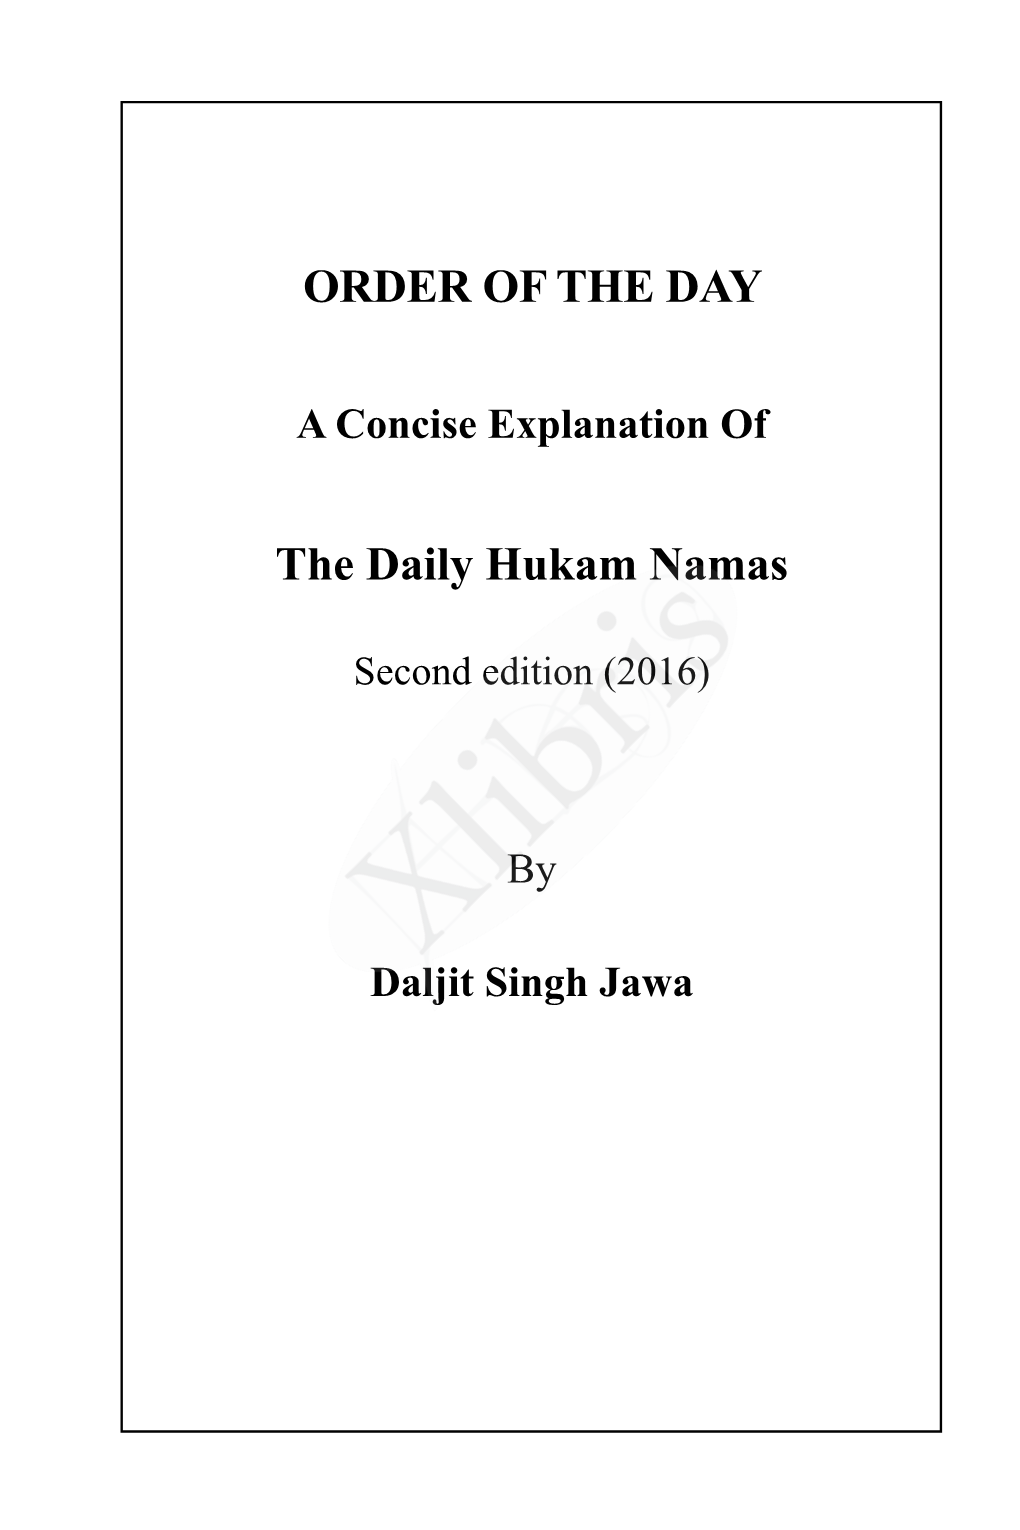 ORDER of the DAY the Daily Hukam Namas